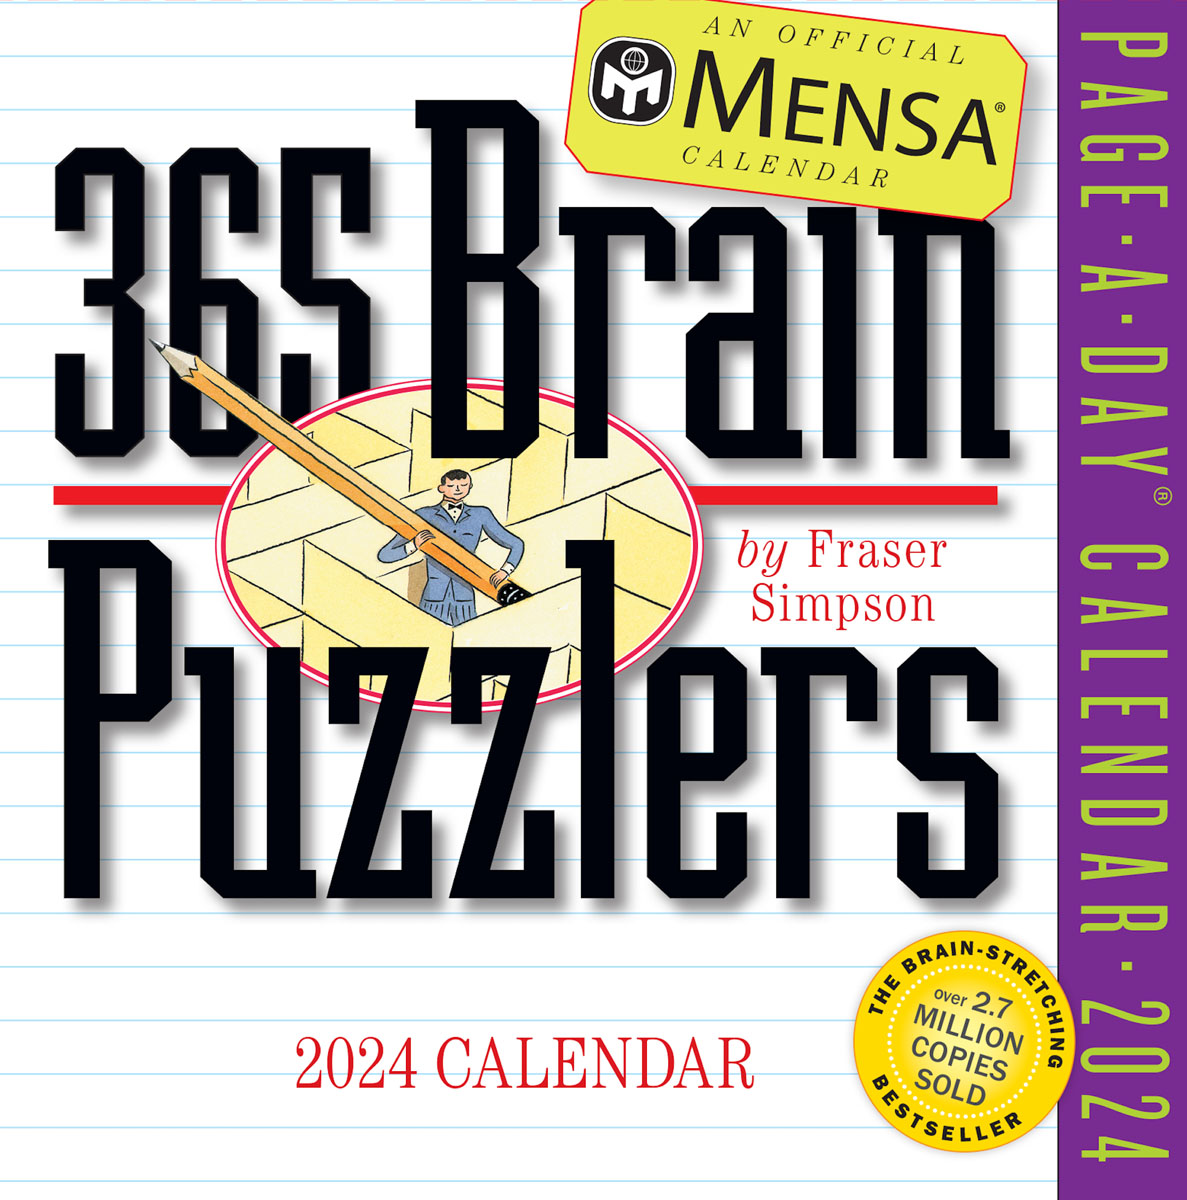 Review: Can You Pass Mensa's Brain Test?